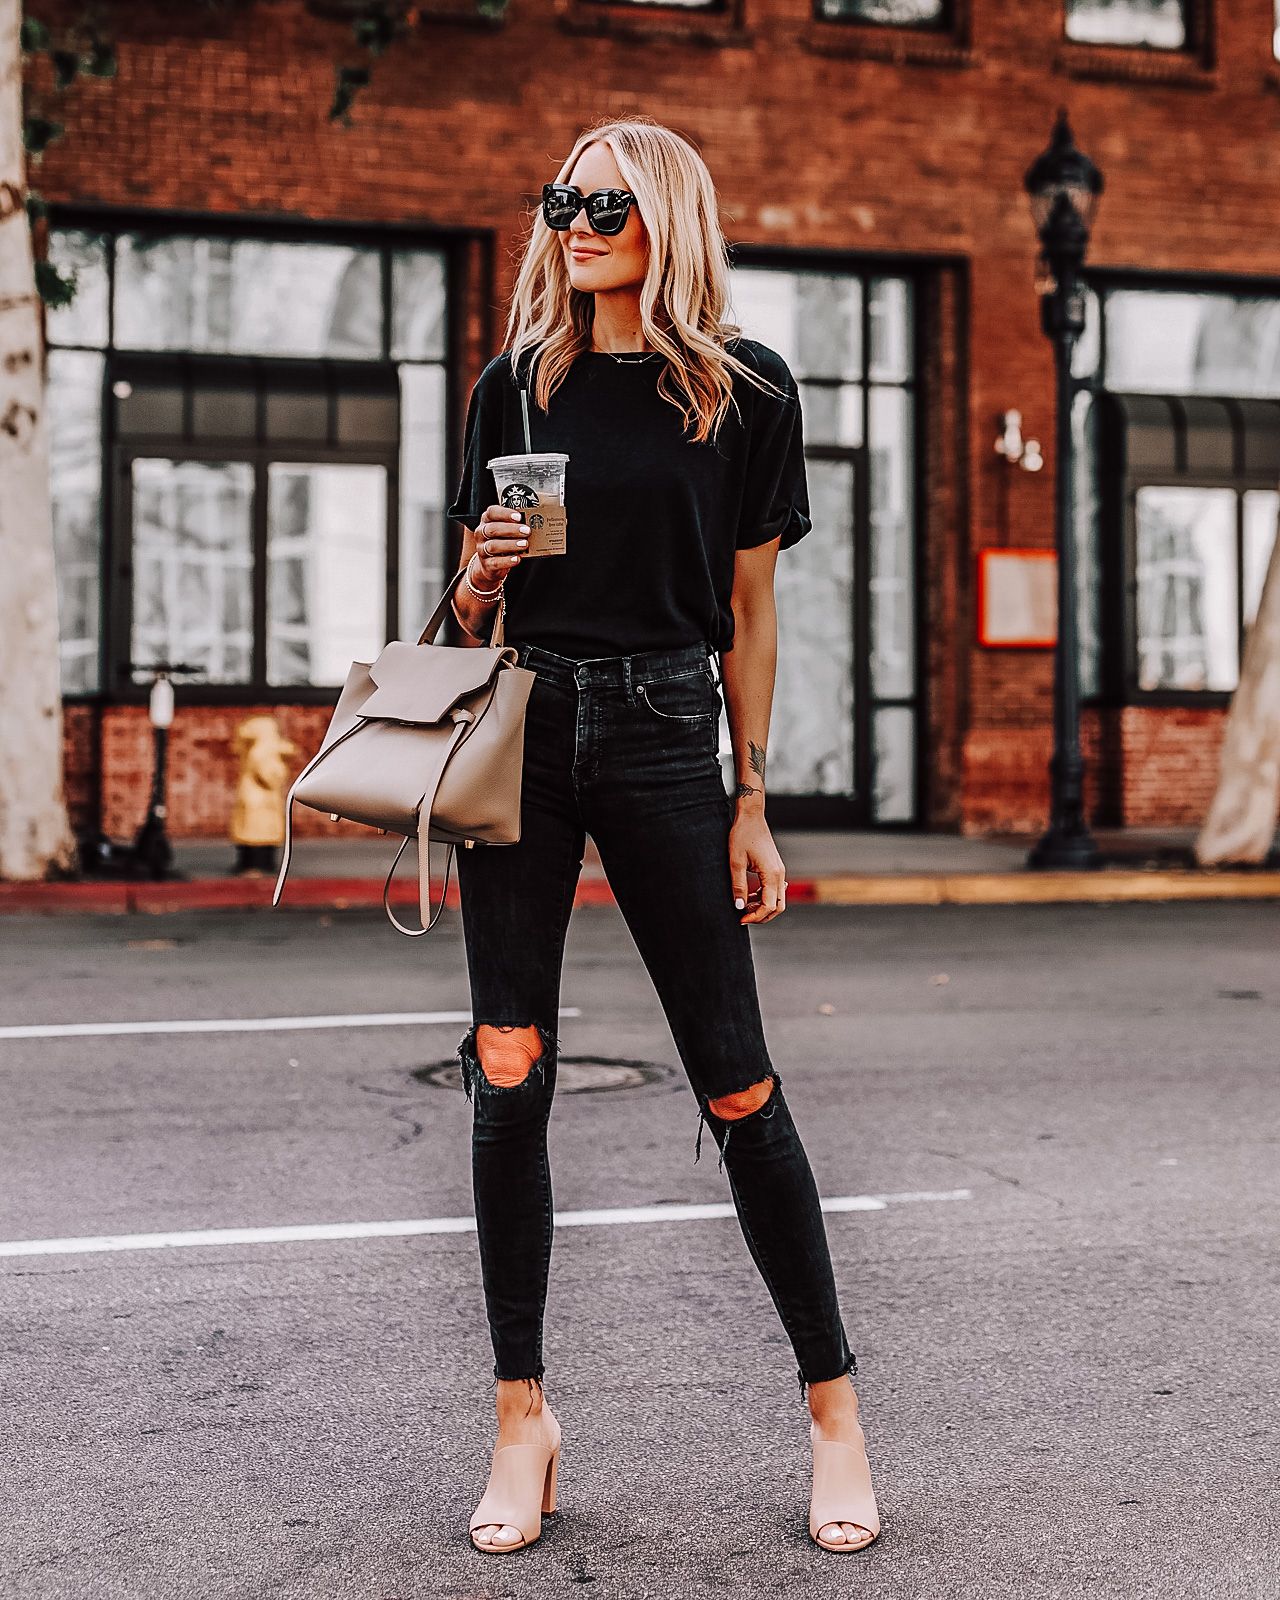 Best 15 Black Ripped Jeans Outfit Ideas for Women: Style Guide